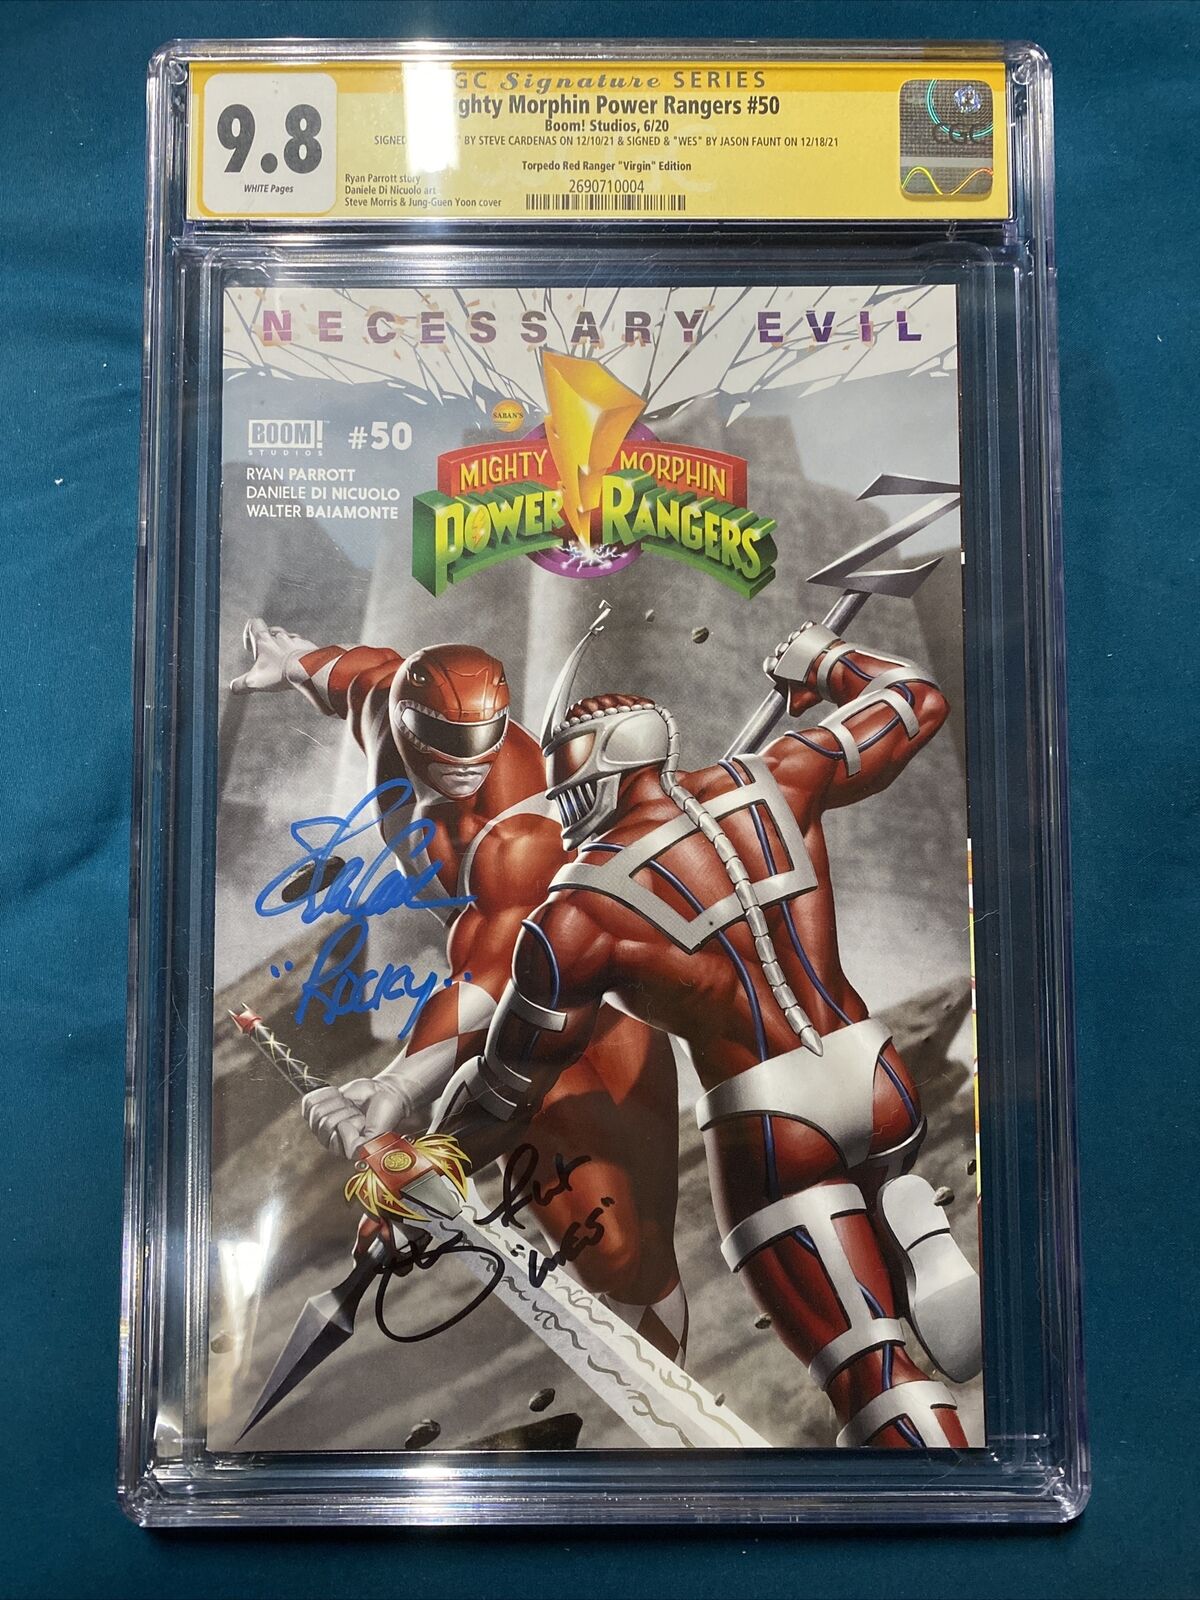 Mighty Morphin Power Rangers #50 CGC SS 9.8. Double Signed S Cardenas & J Faunt